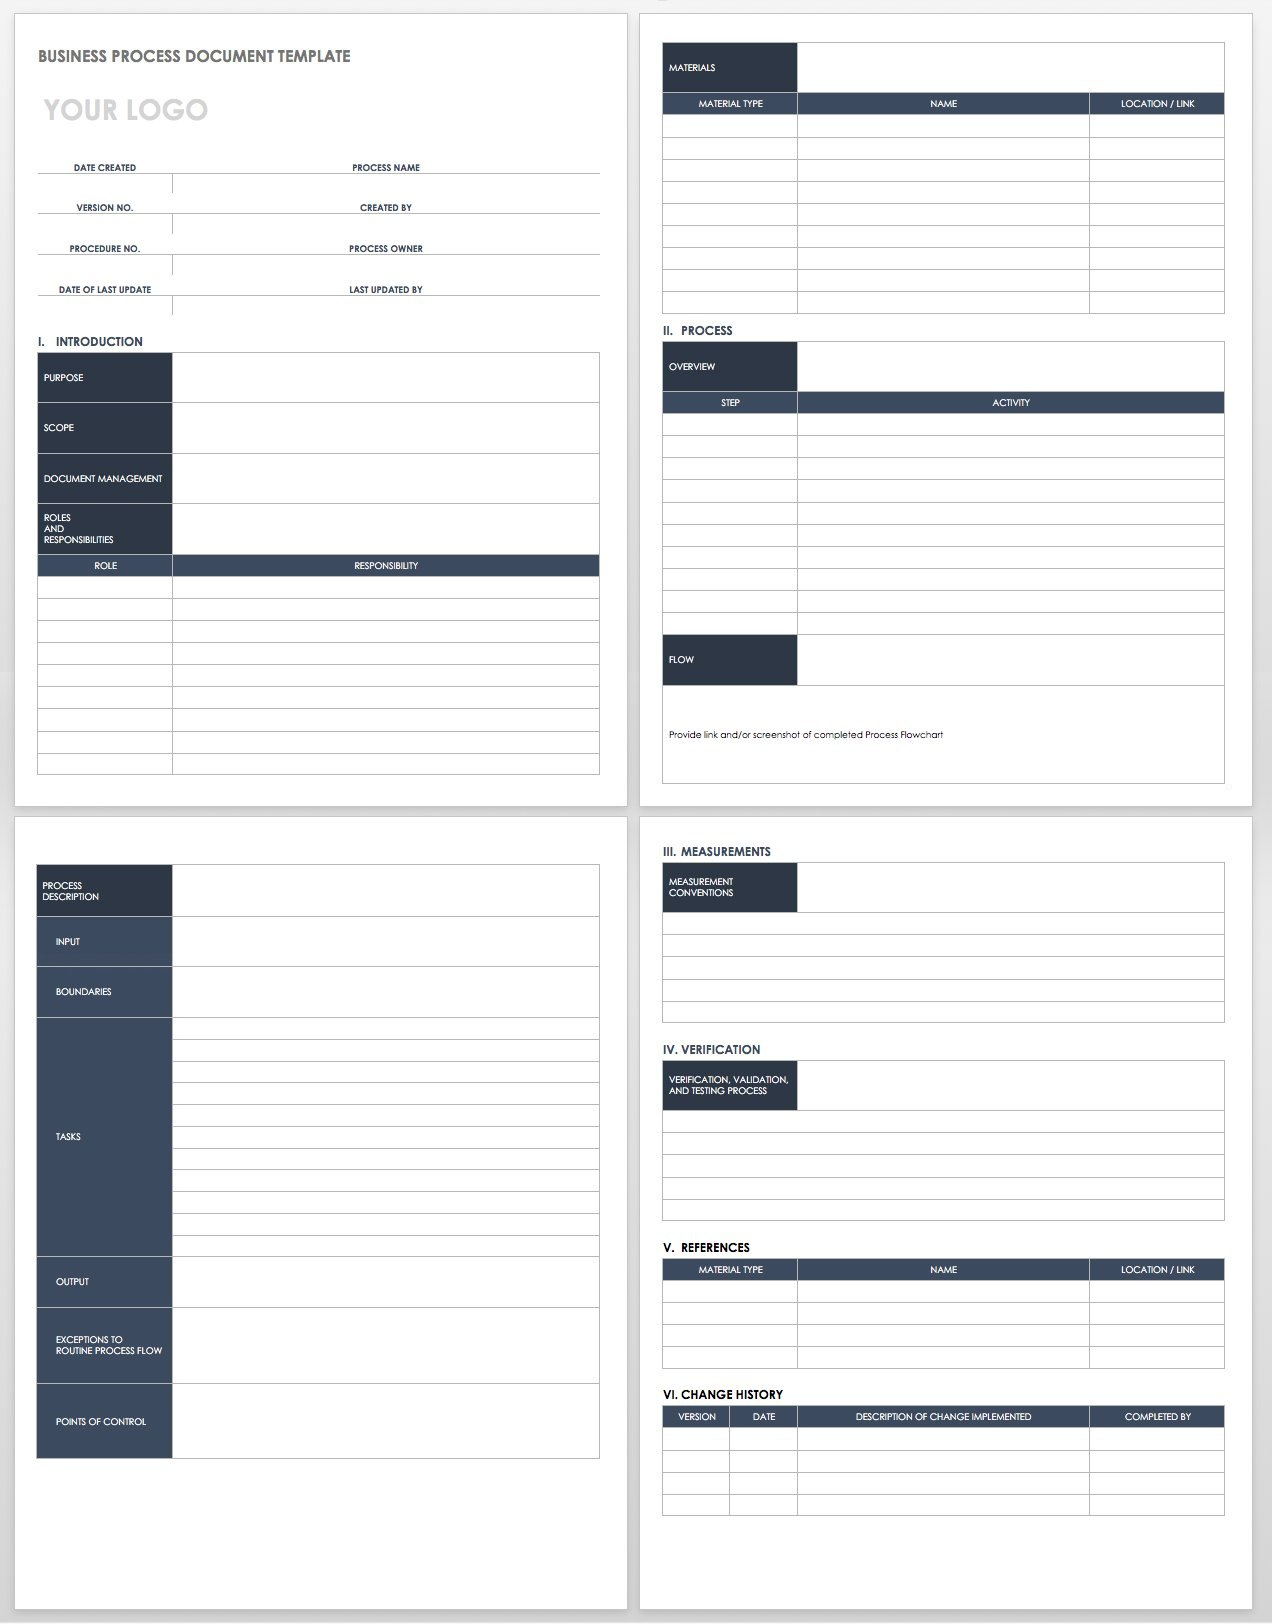 Free Process Document Templates  Smartsheet pertaining to Business Process Documentation Template